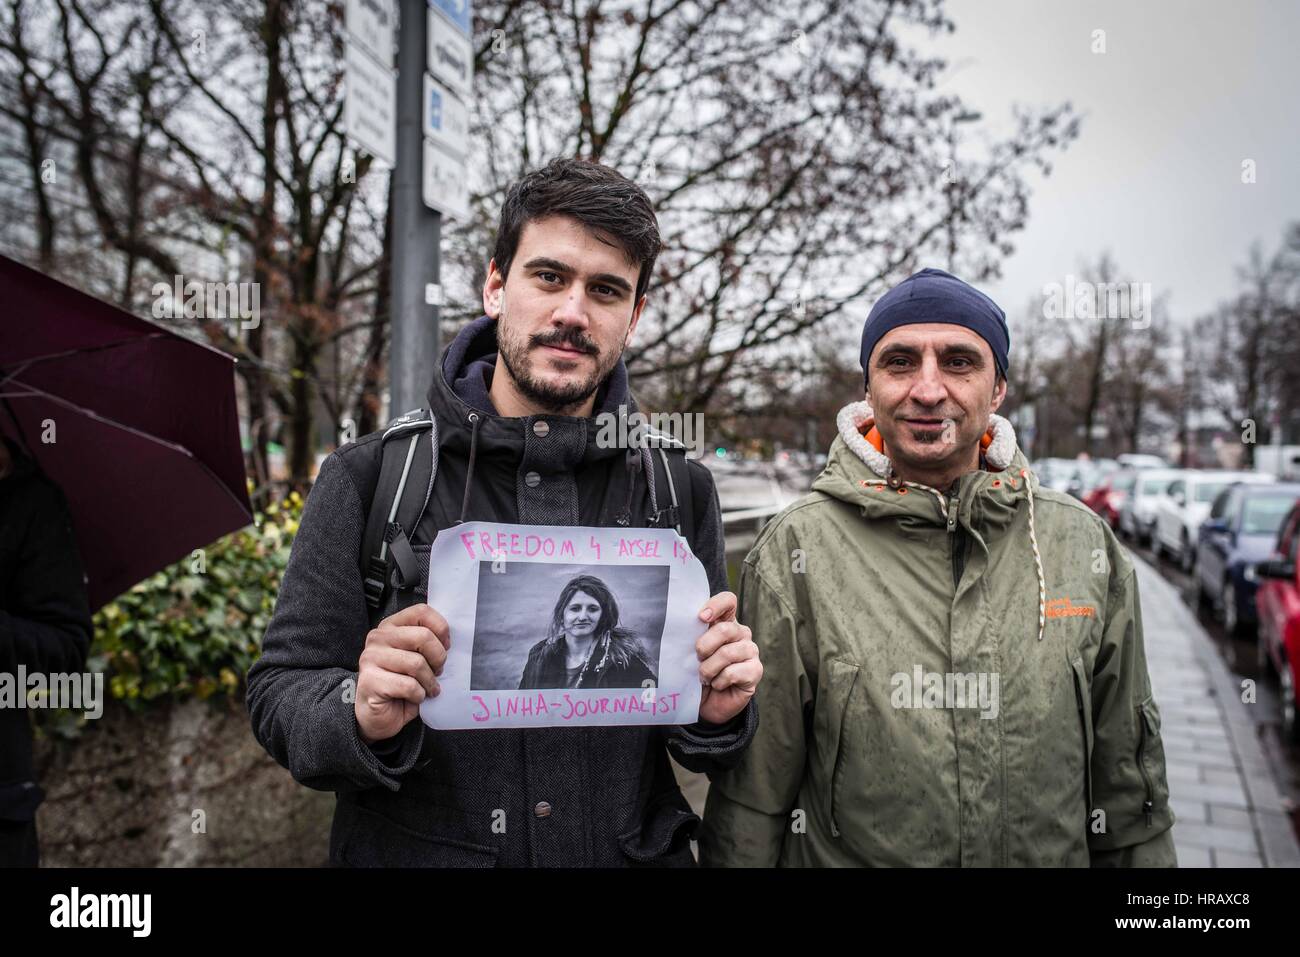 February 28, 2017 - Kerem Schamberger Approximately 35-40 in 30 cars protested in a motorcade from Munich's Bavariapark, eventually terminating at Geschwister-Scholl-Platz at LMU. On Monday, Turkish authorities arrested Deniz Yucel, a prominent reporter for Germany's Die Welt, charging him with propaganda in support of a terrorist organization and incitement of the masses to commit violence. Yucel was detained on Feb. 14th after a report on emails obtained by a left-wing hacker group from energy minister and Erdogan's son-in-law Berat Albayrak. Among the participants were the German J Stock Photo